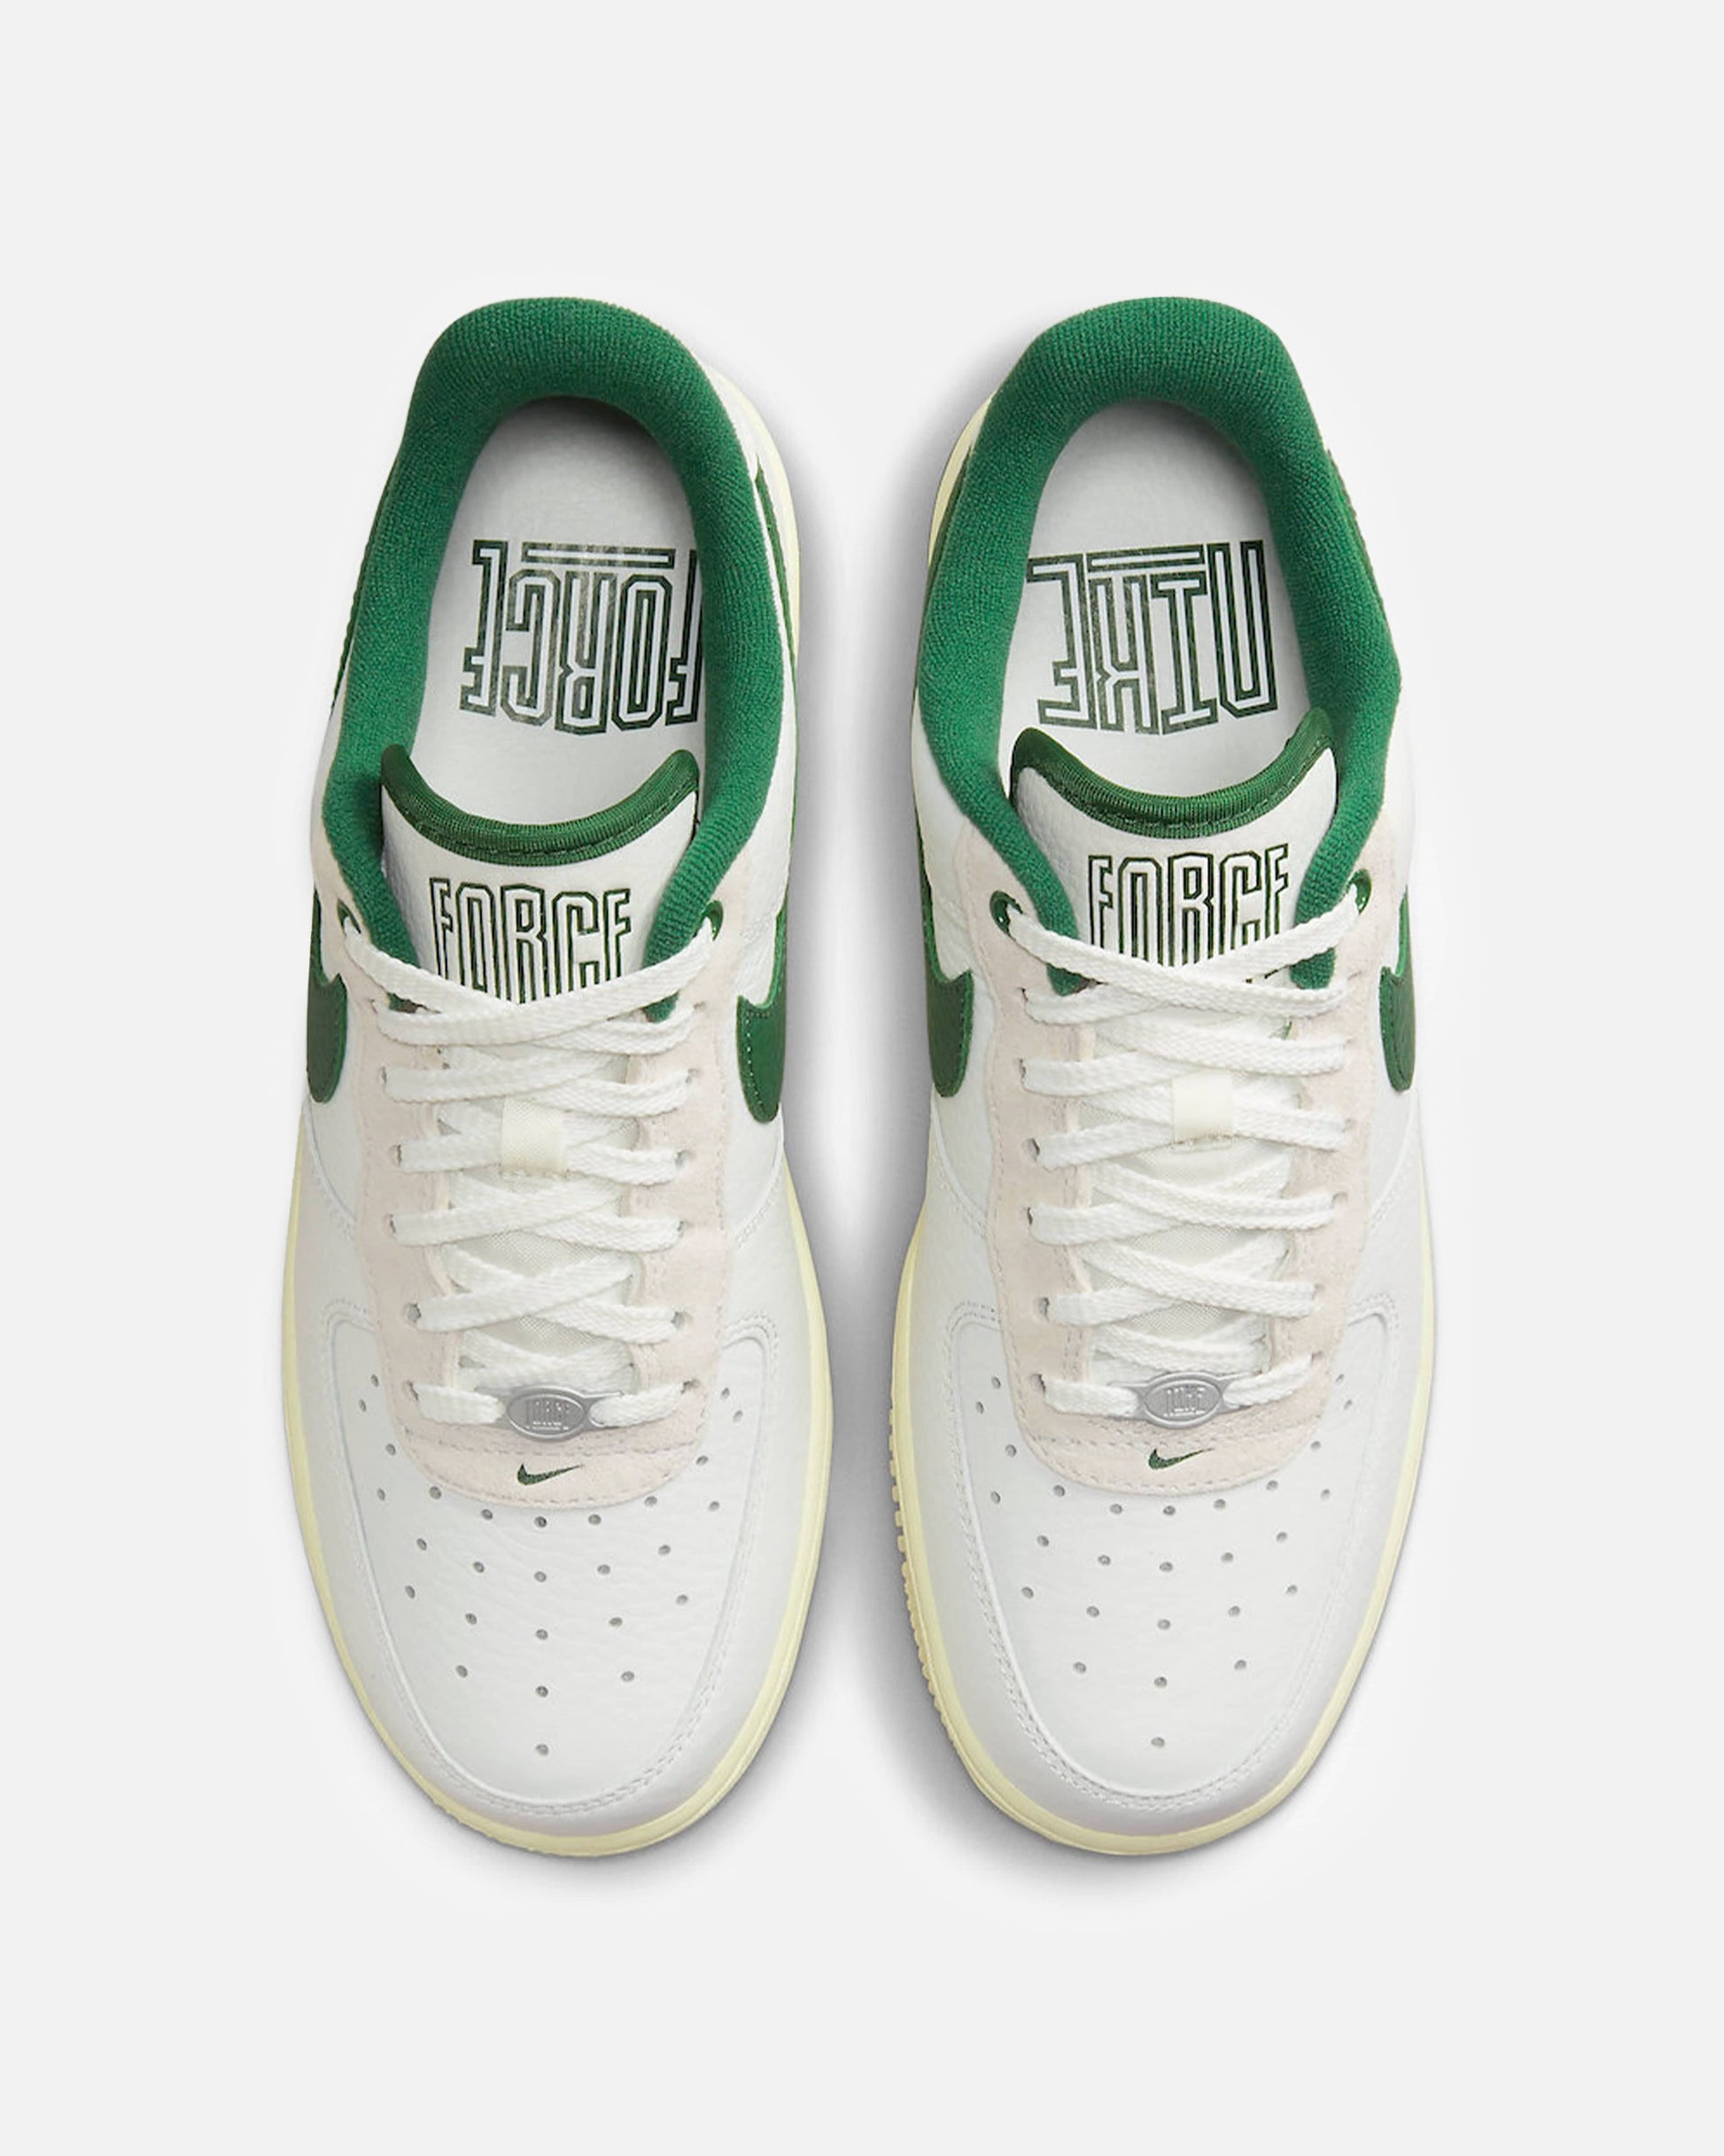 Nike Women's Shoes Air Force 1 '07 LX 'Summit White/Gorge Green'